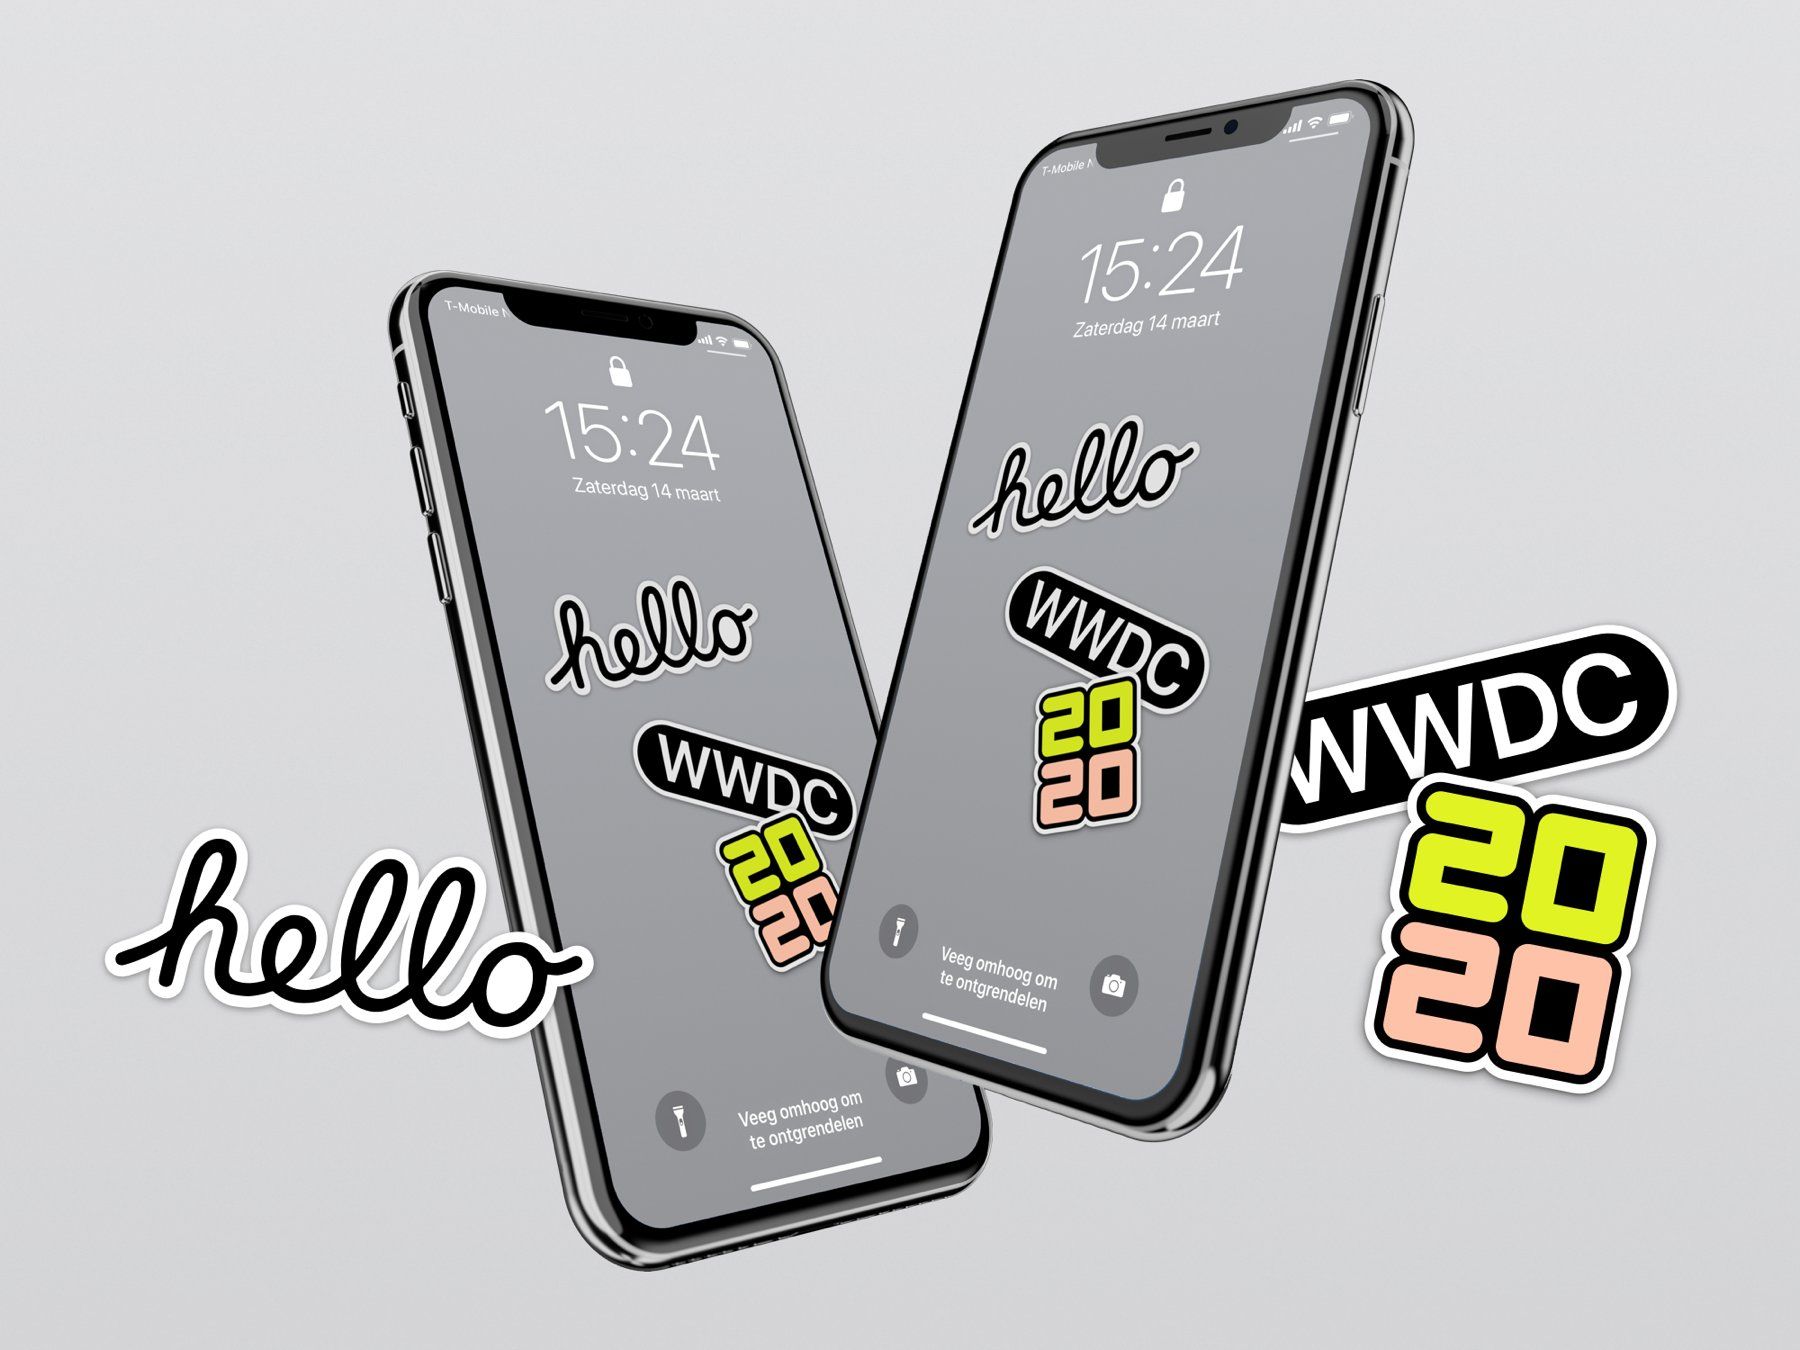 WWDC 2020 wallpaper for iPhone and iPad